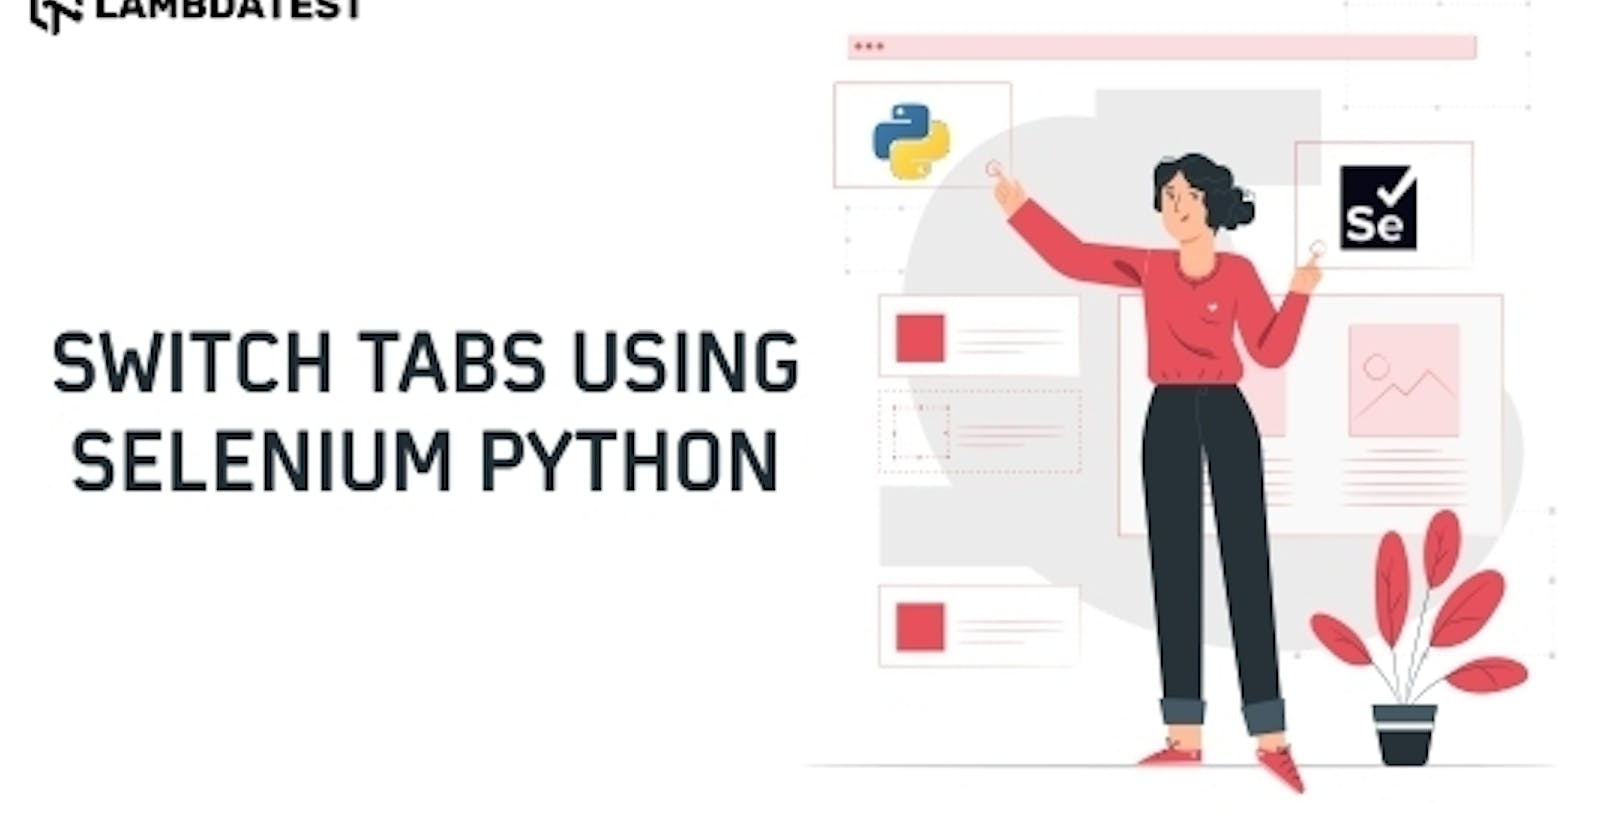 How To Switch Tabs In A Browser Using Selenium Python?